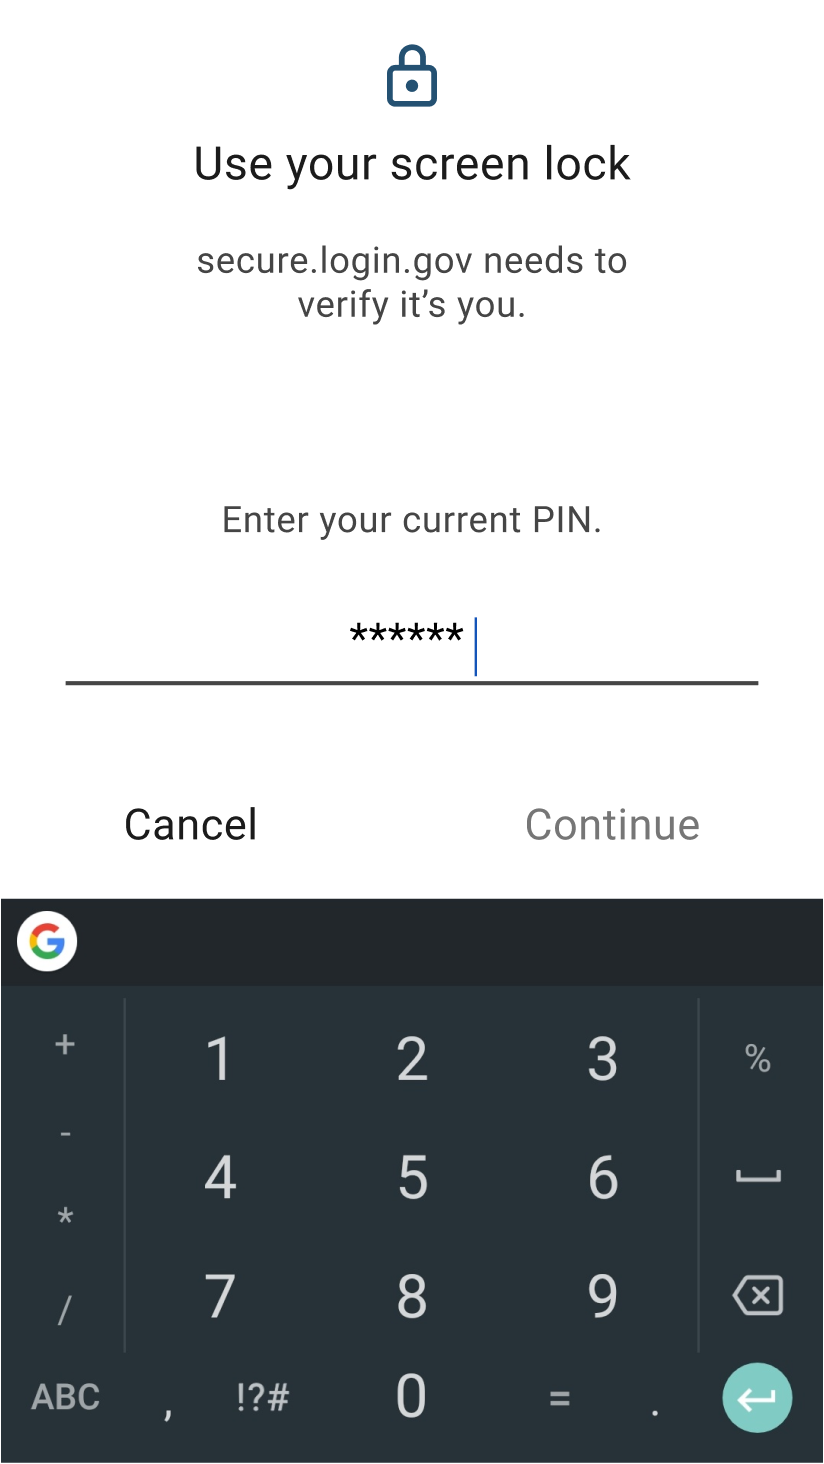 Example of a prompt that may be encountered upon setting up or using face or touch unlock: Screenshot of a screen lock PIN prompt